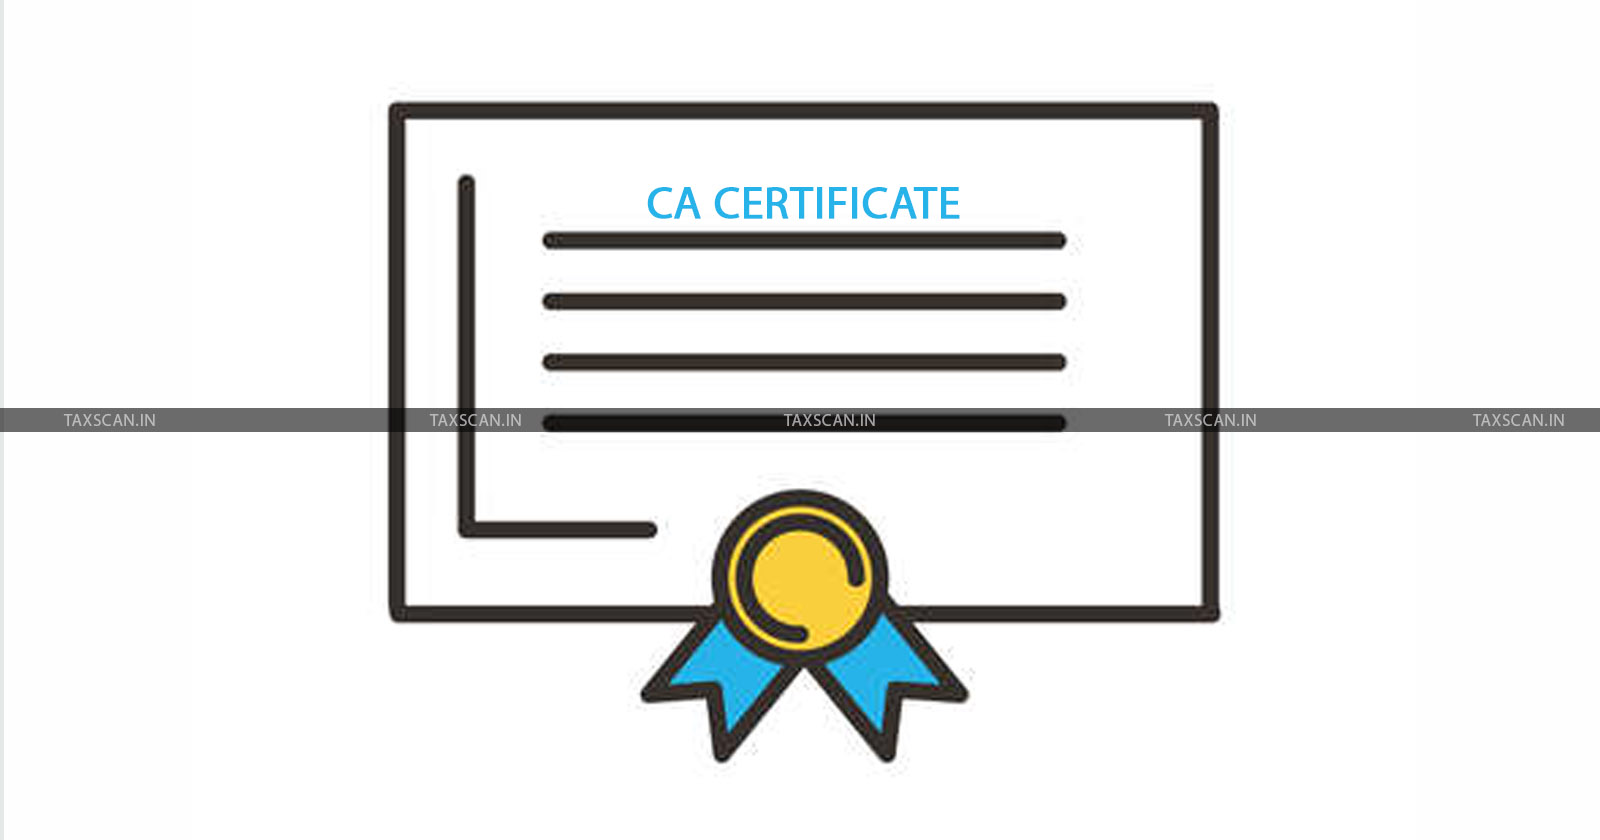 CA Certification - Do's and Don'ts Of CA Certification - Certifications - CA Certification of Documents - Certification of Documents - TAXSCAN